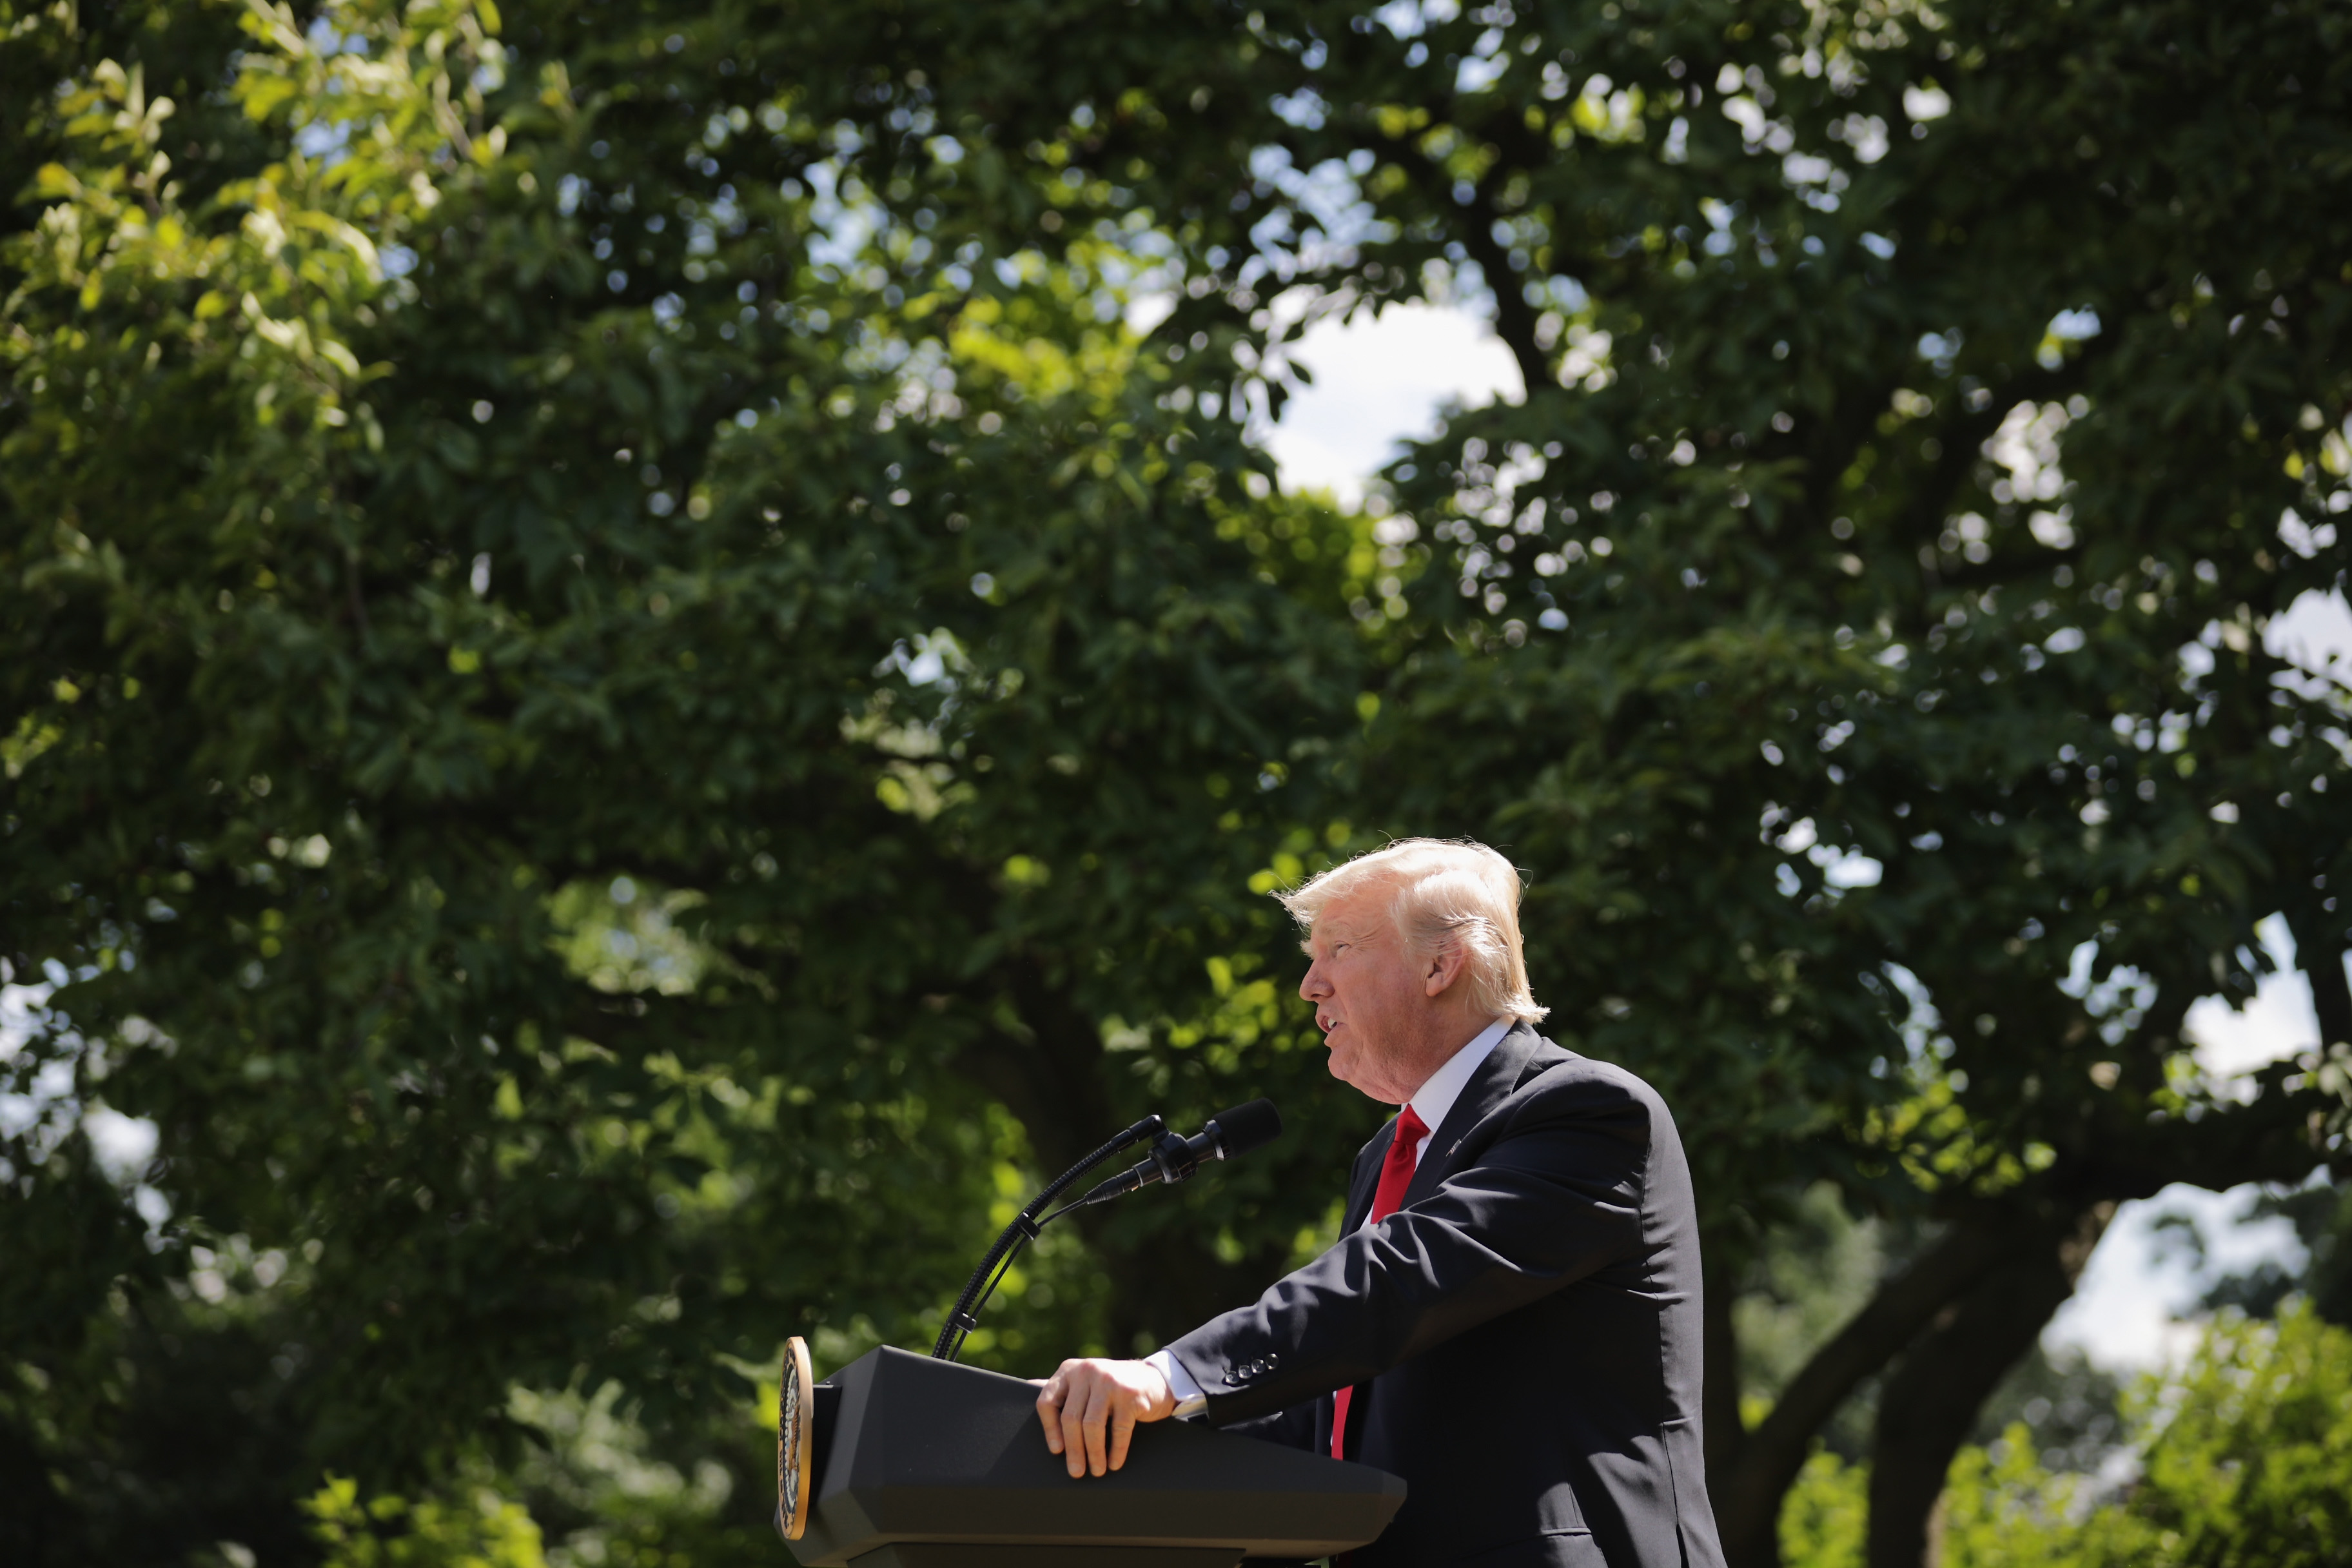 U.S. President Donald Trump announces his decision to pull the United States out of the Paris climate agreement in the Rose Garden at the White House June 1, 2017 in Washington, D.C. (Chip Somodevilla&mdash;Getty Images)